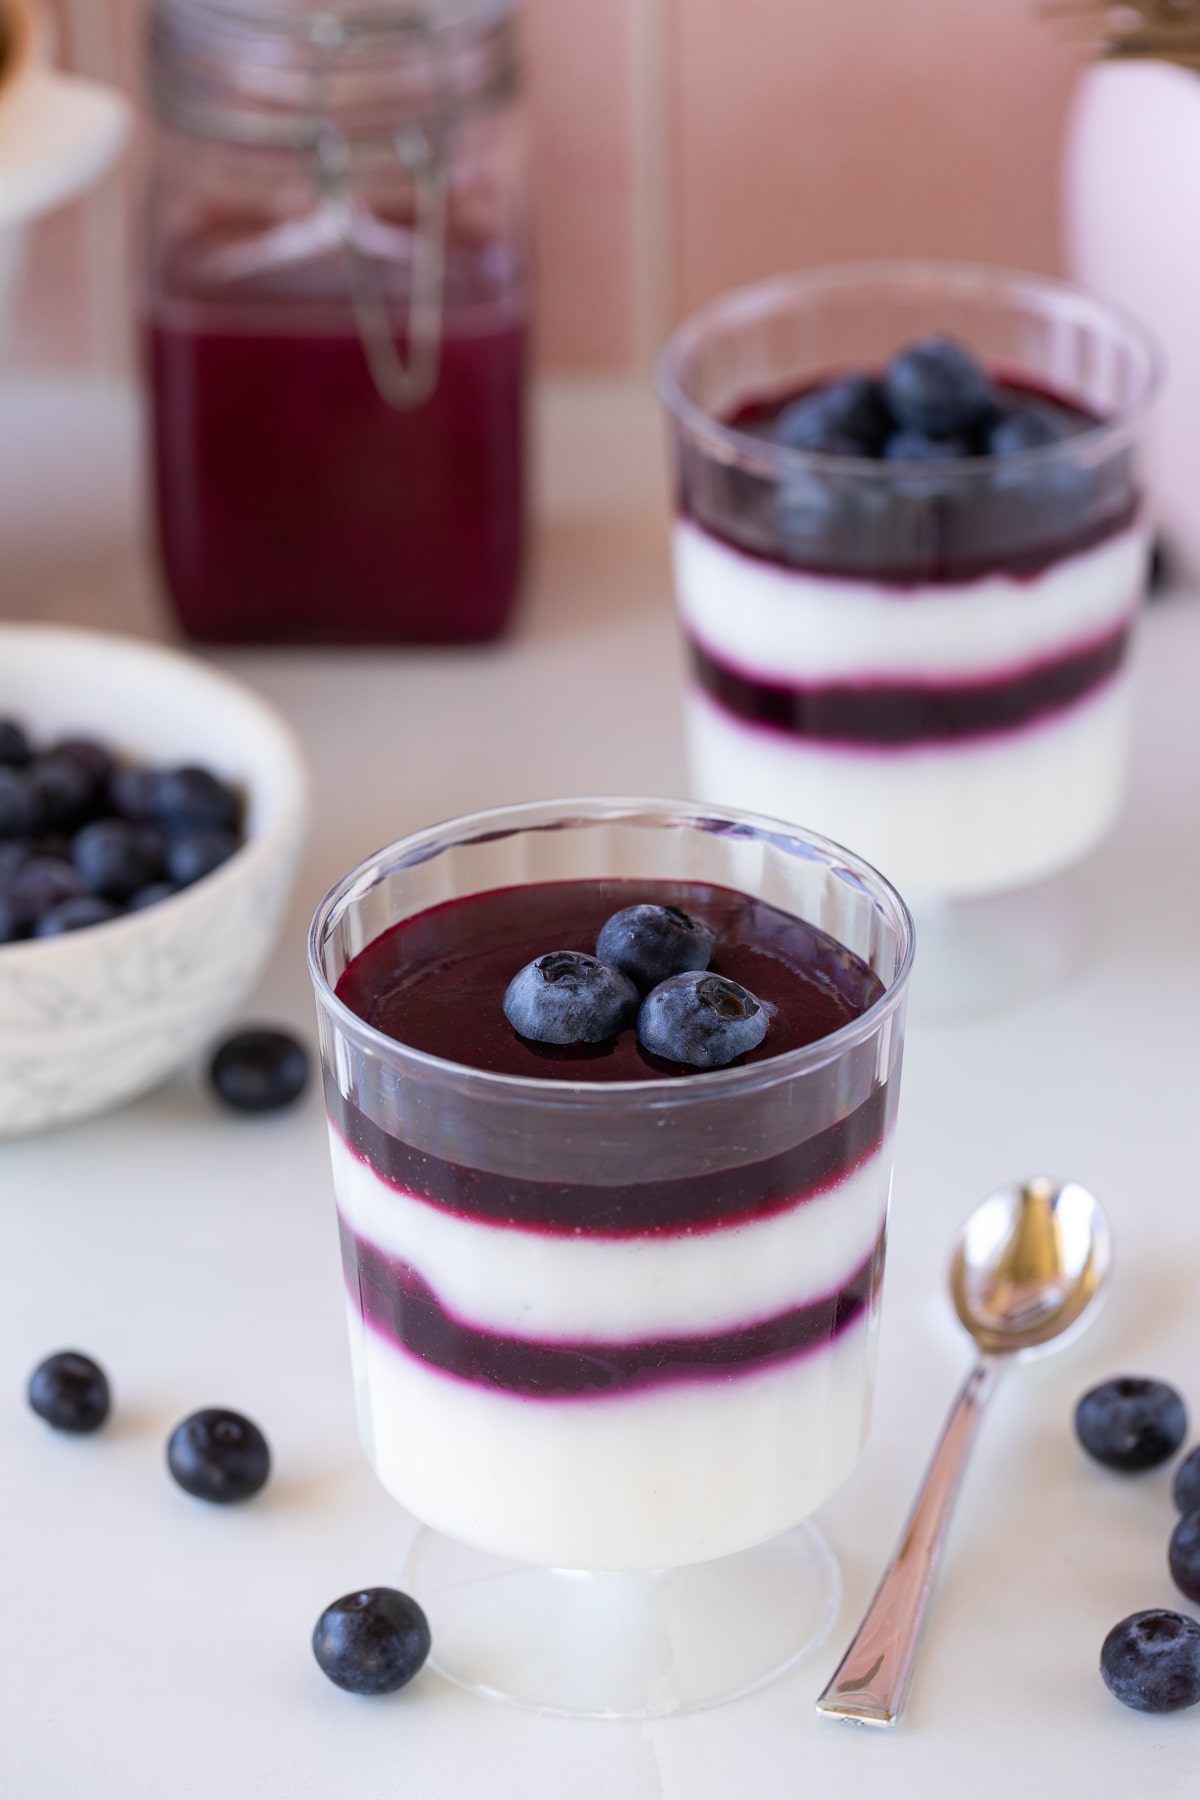 blueberry coulis layered with panna cotta.